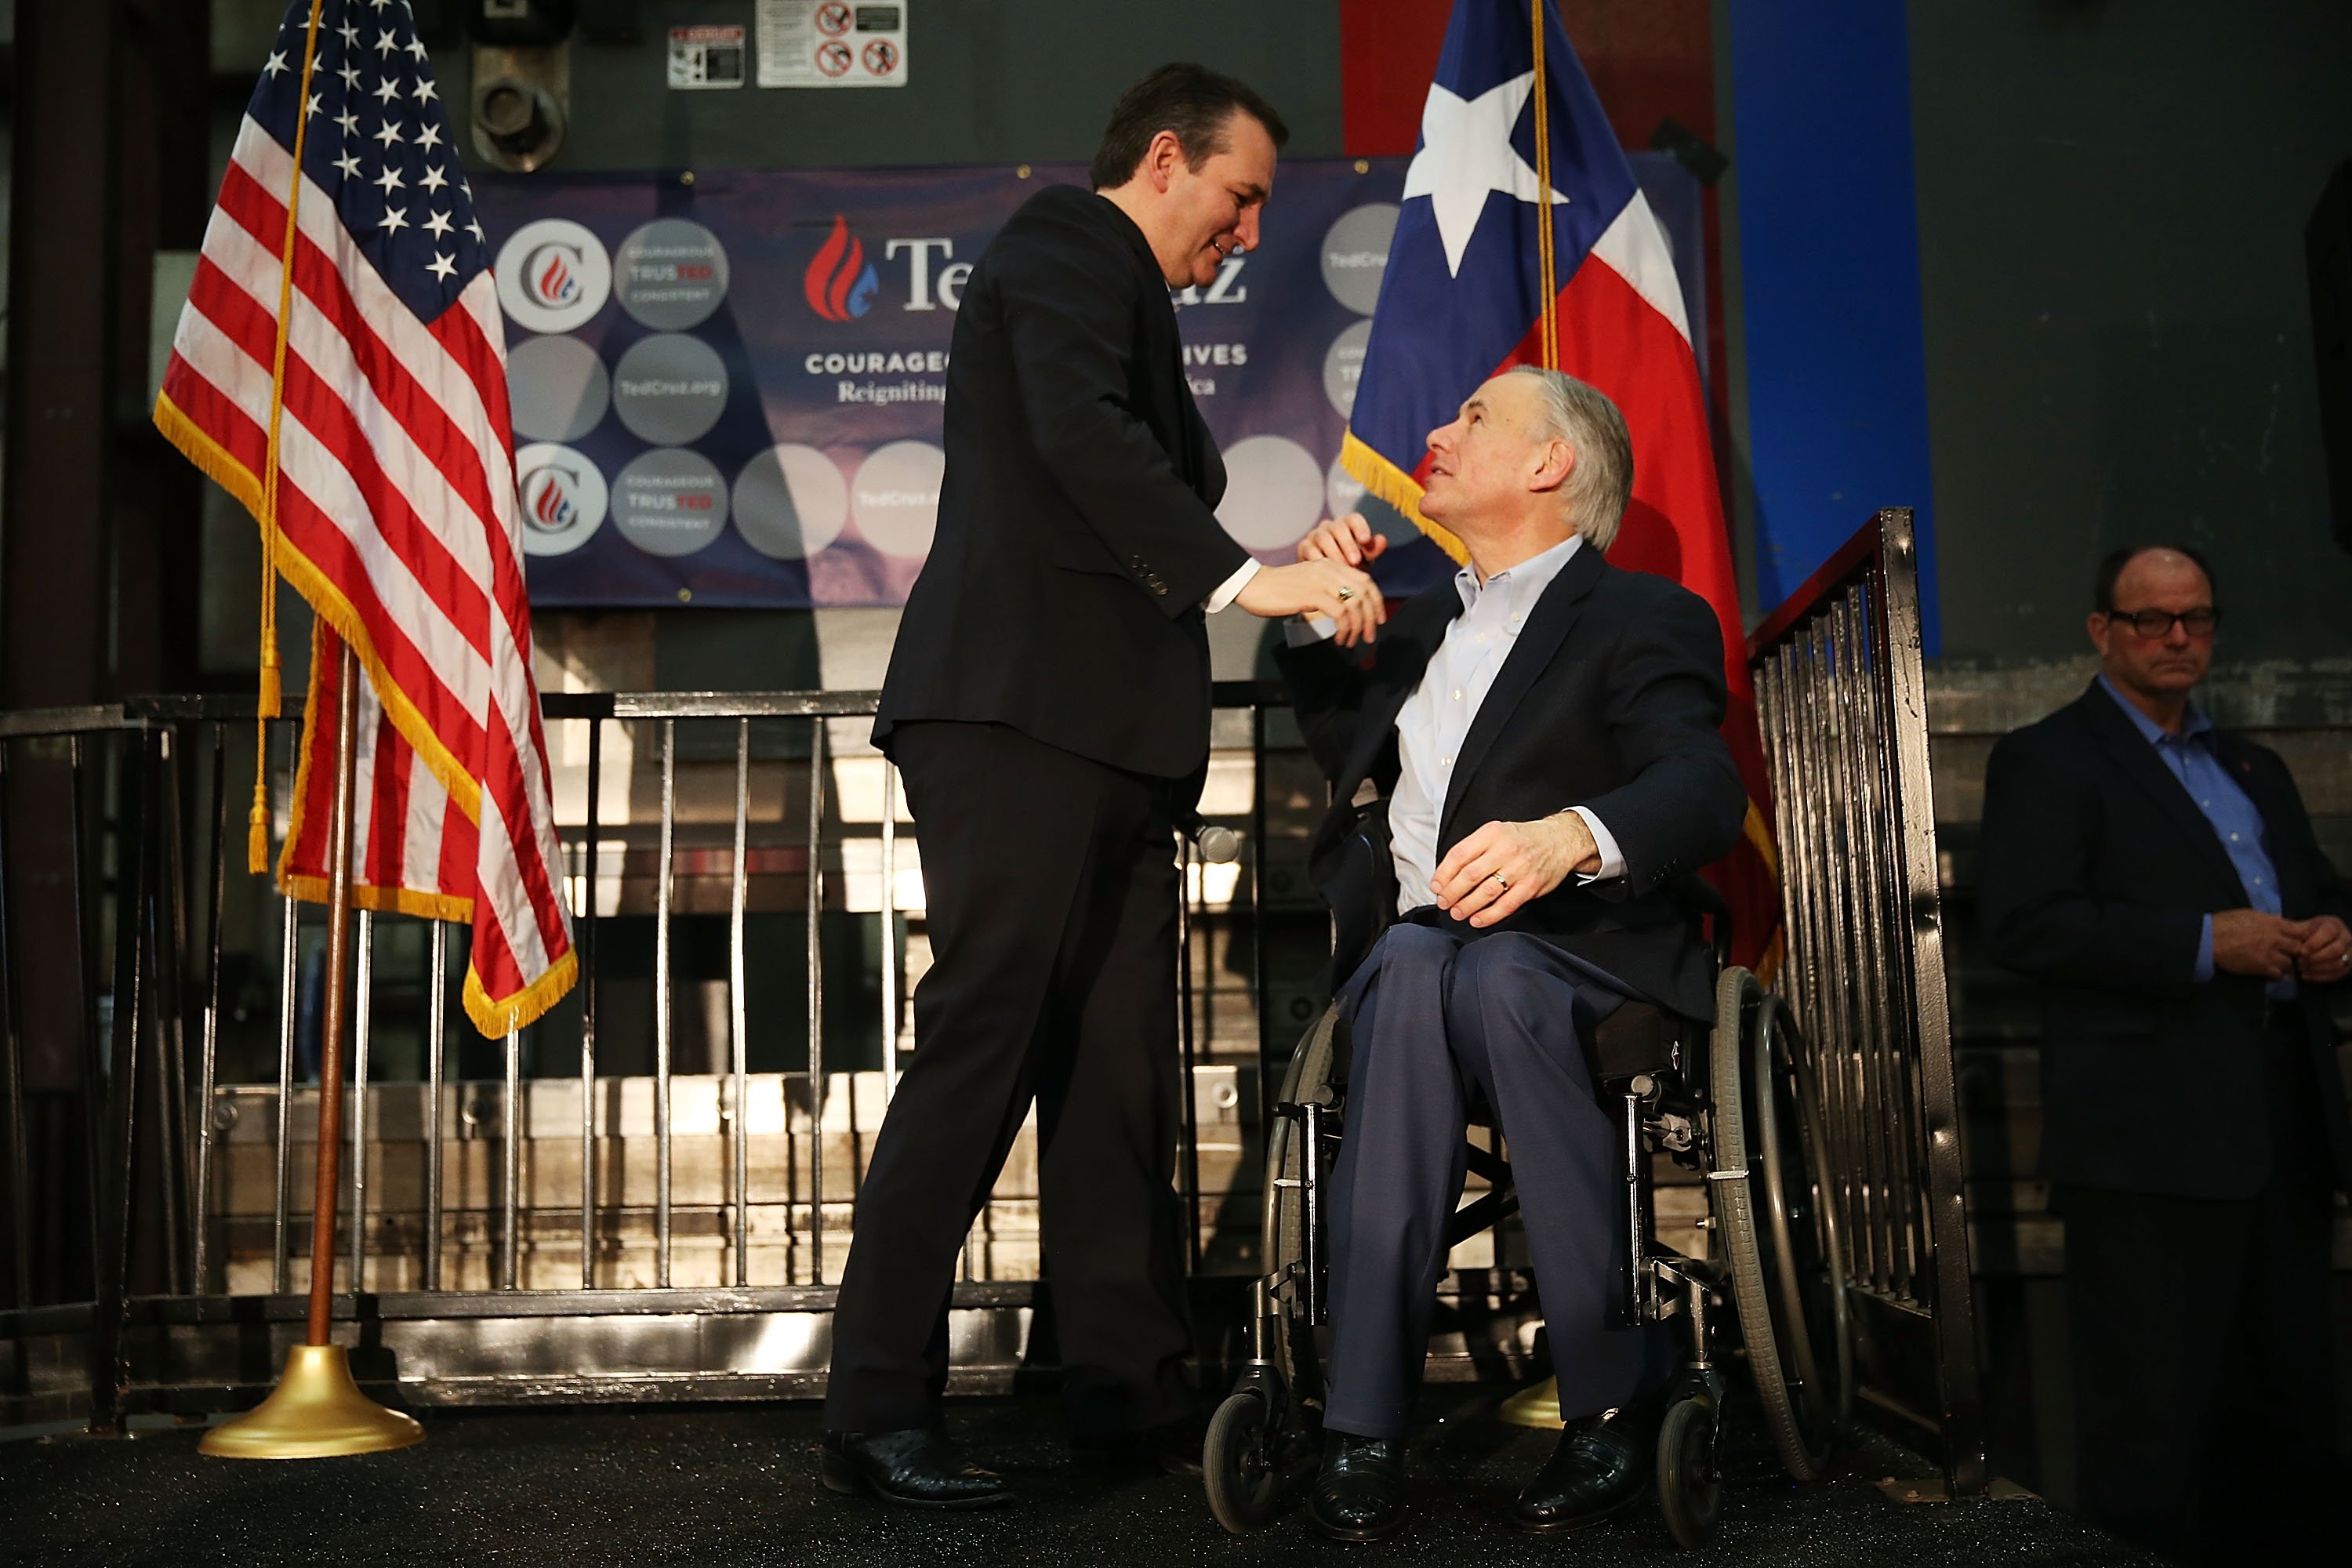 Texas Governor, Greg Abbott, (R) greets Republican presidential candidate U.S. Sen. Ted Cruz (R-TX) during a campaign rally where the Texas governor endorsed him at the Mach Industrial Group on February 24, 2016 in Houston, Texas. The process to select the next Democratic and Republican Presidential candidates continues. (Photo by Joe Raedle/Getty Images)